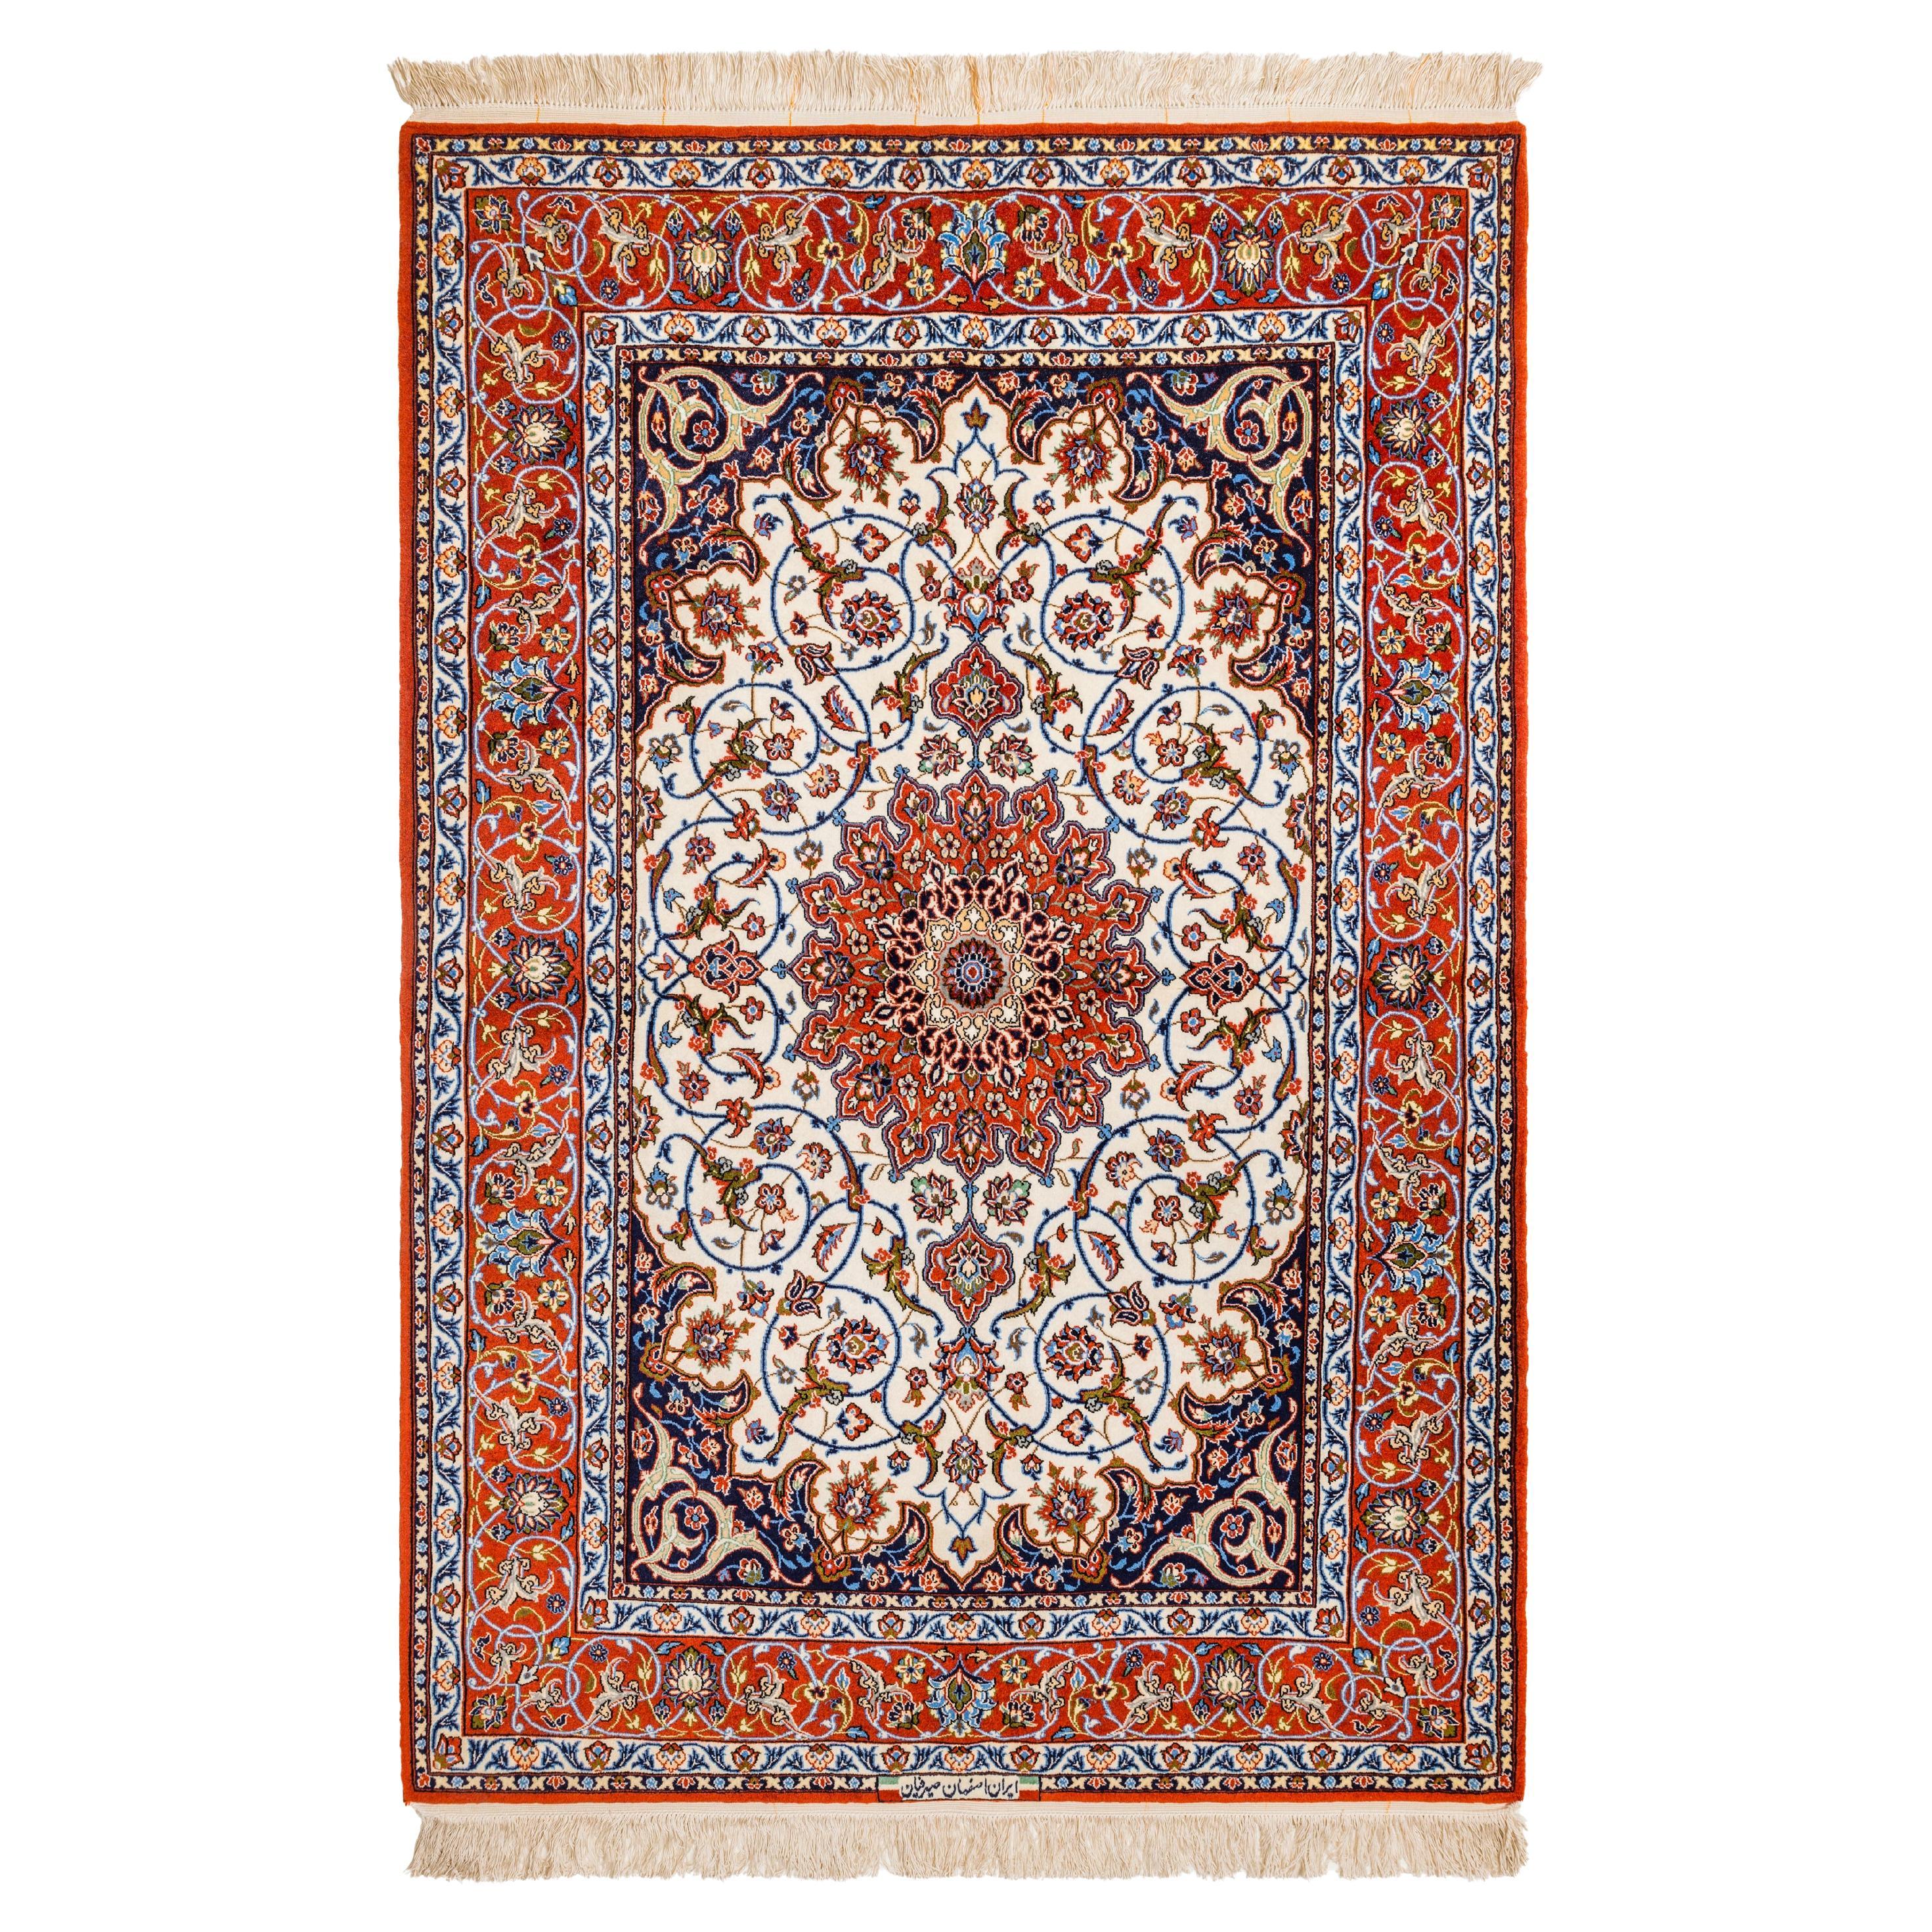 Isfahan, Authentic Persian Wool Area Rug Ivory 5' 5" X 3' 8"